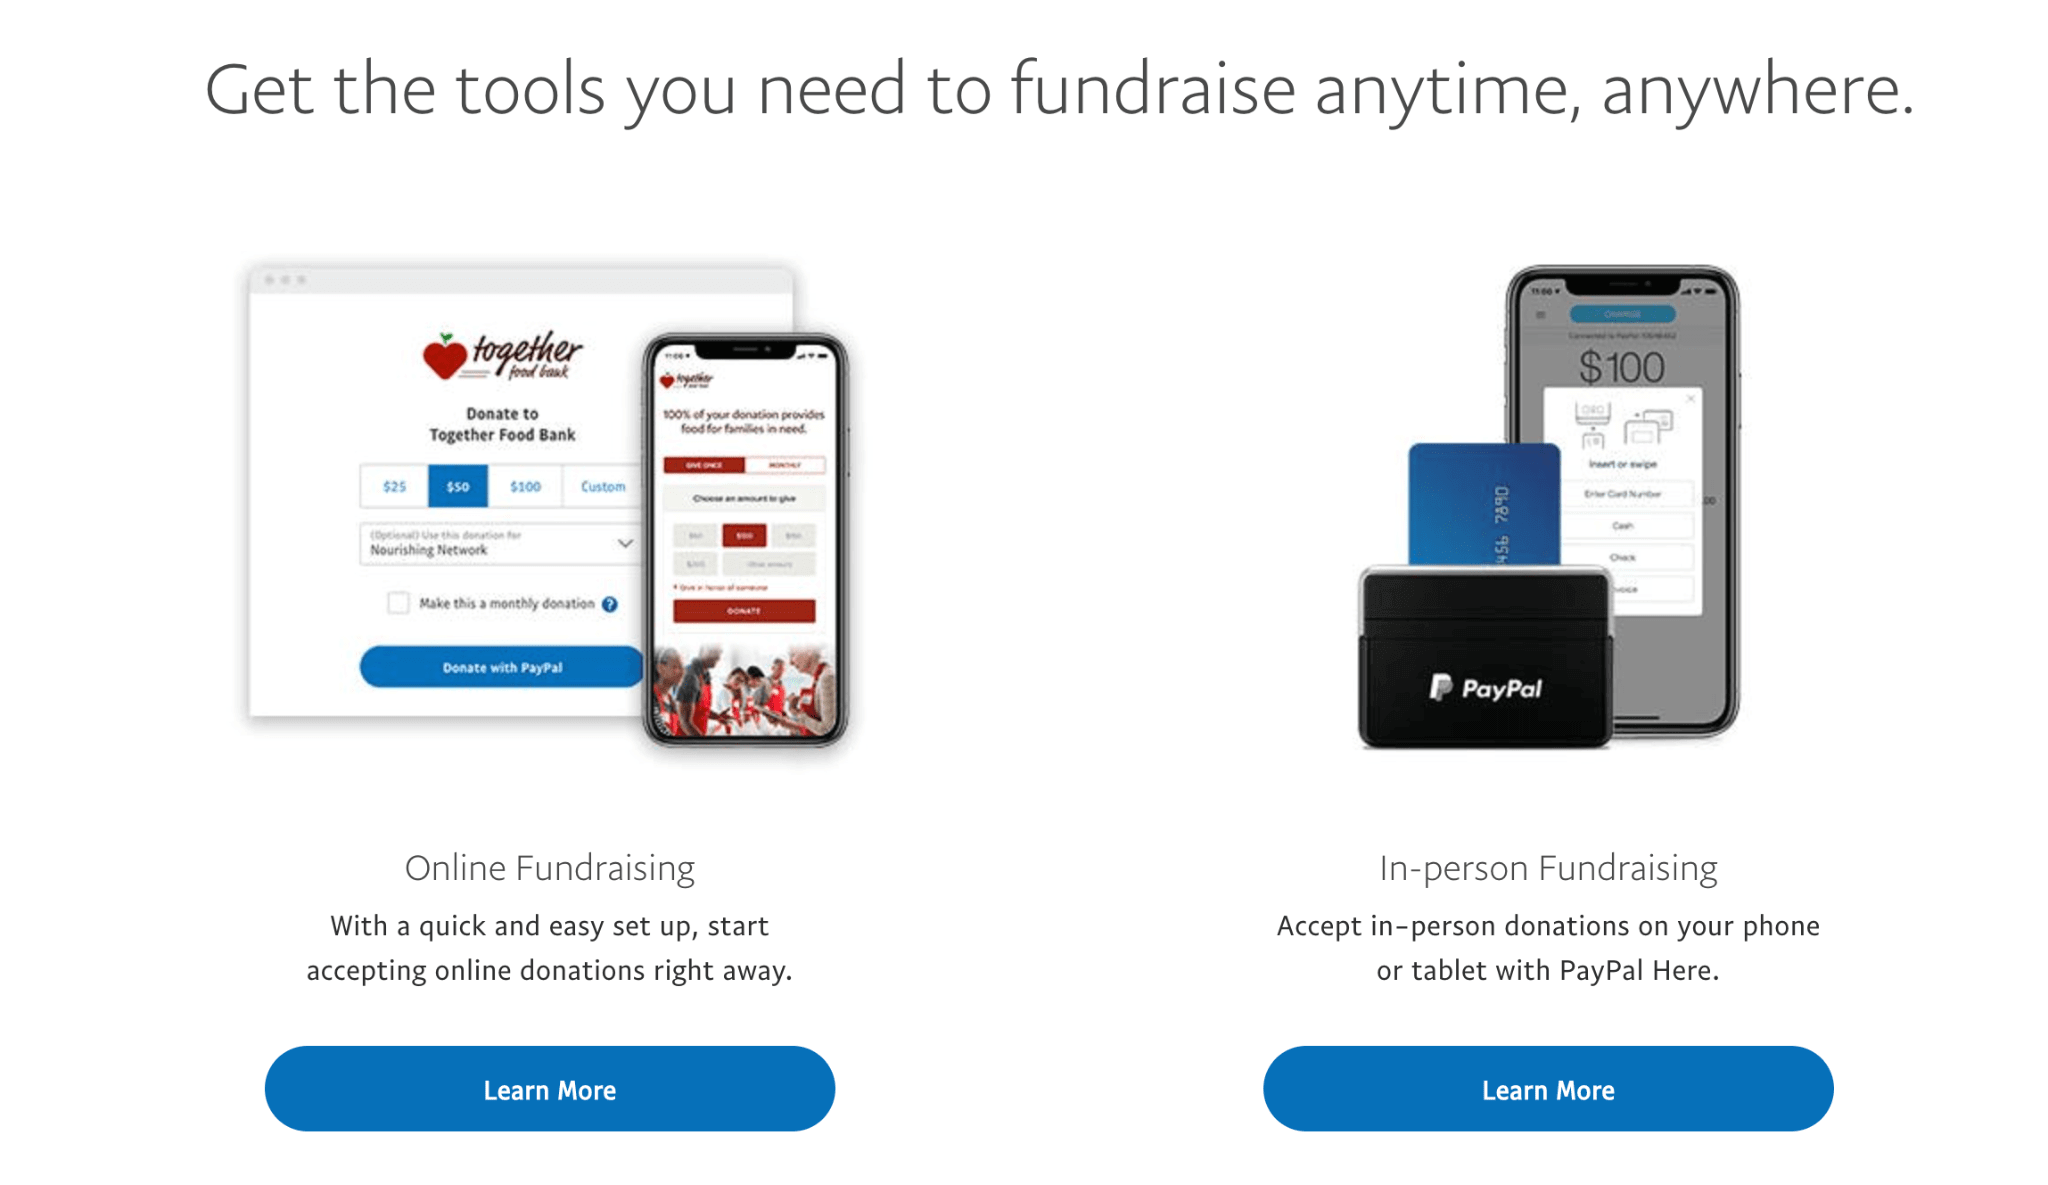 PayPal fundraising functions